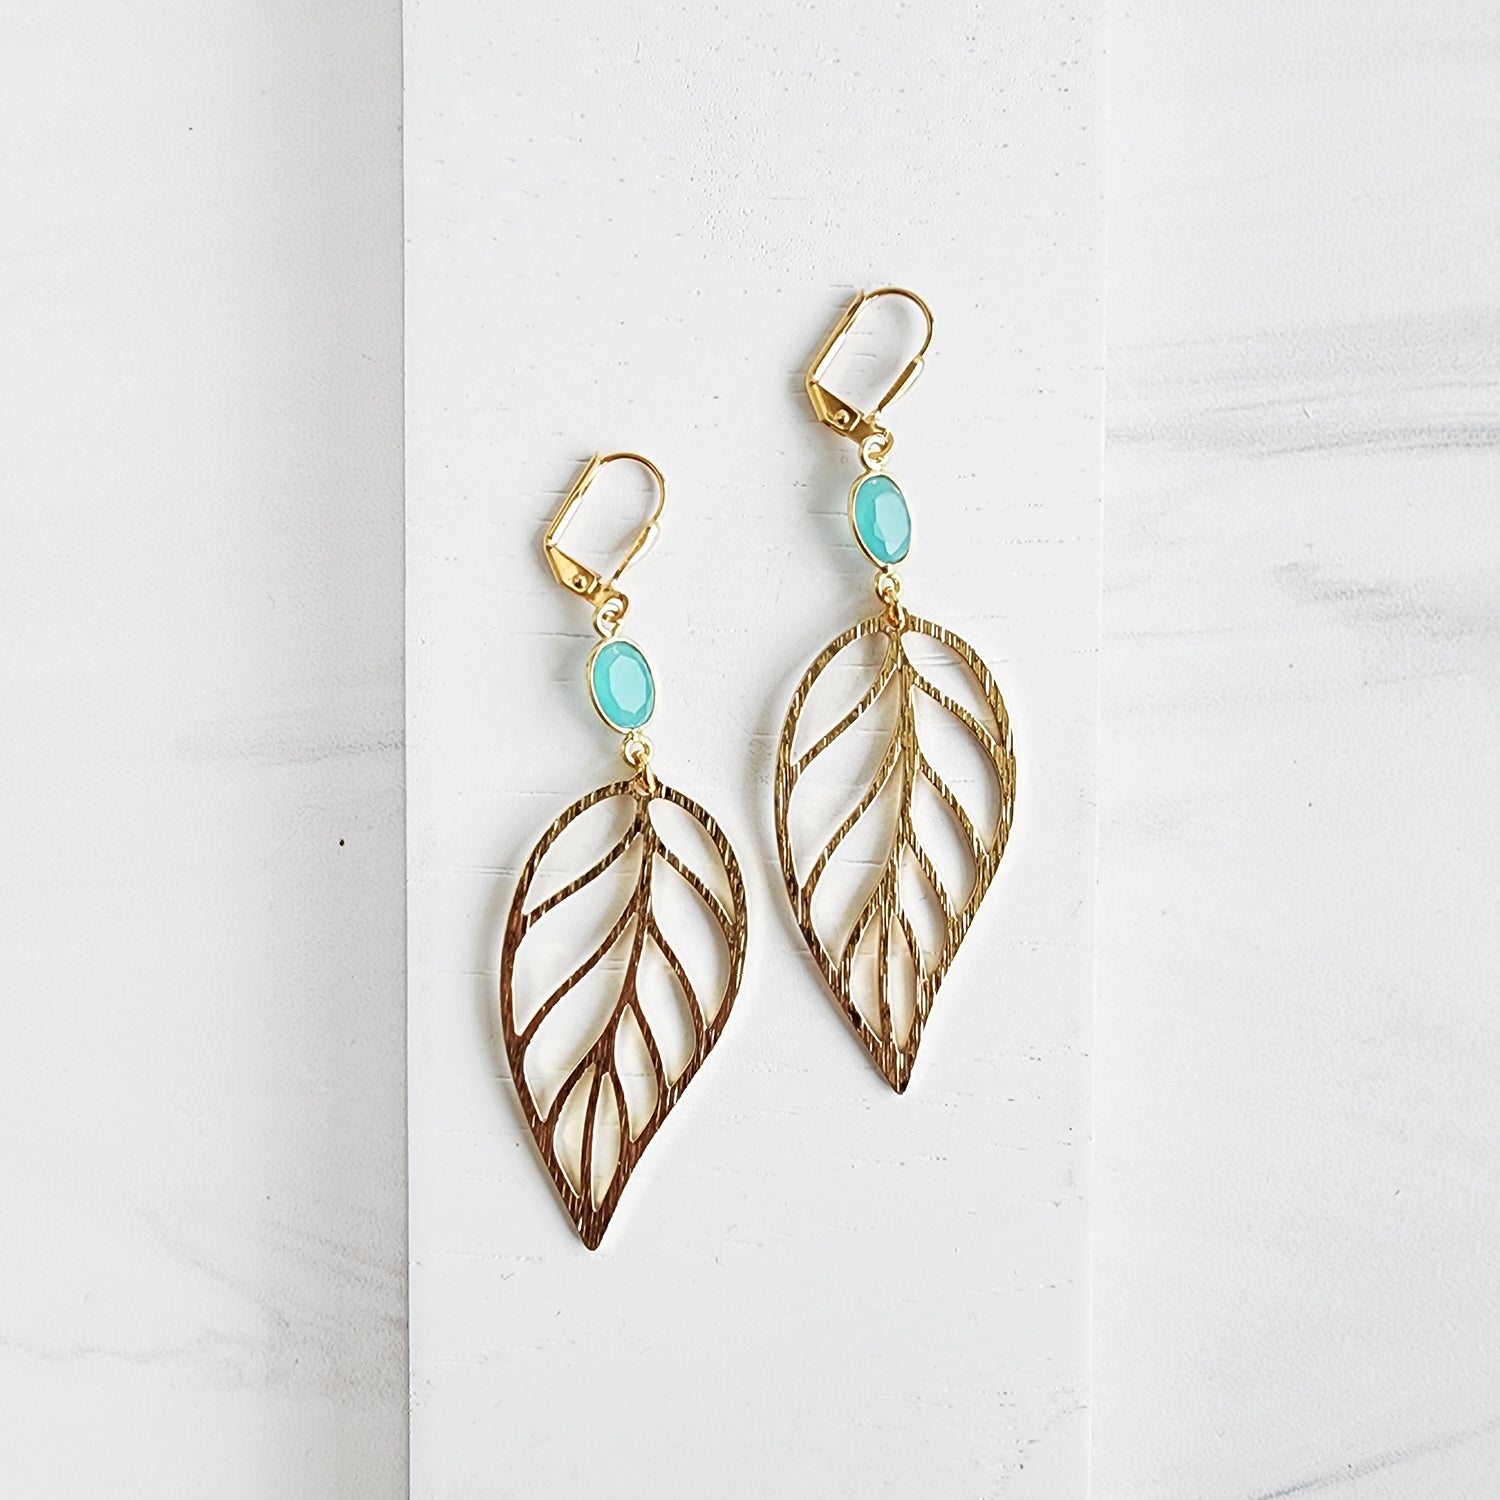 Turquoise and Wood Bead with Gold Leaf Earrings. Fall | eBay